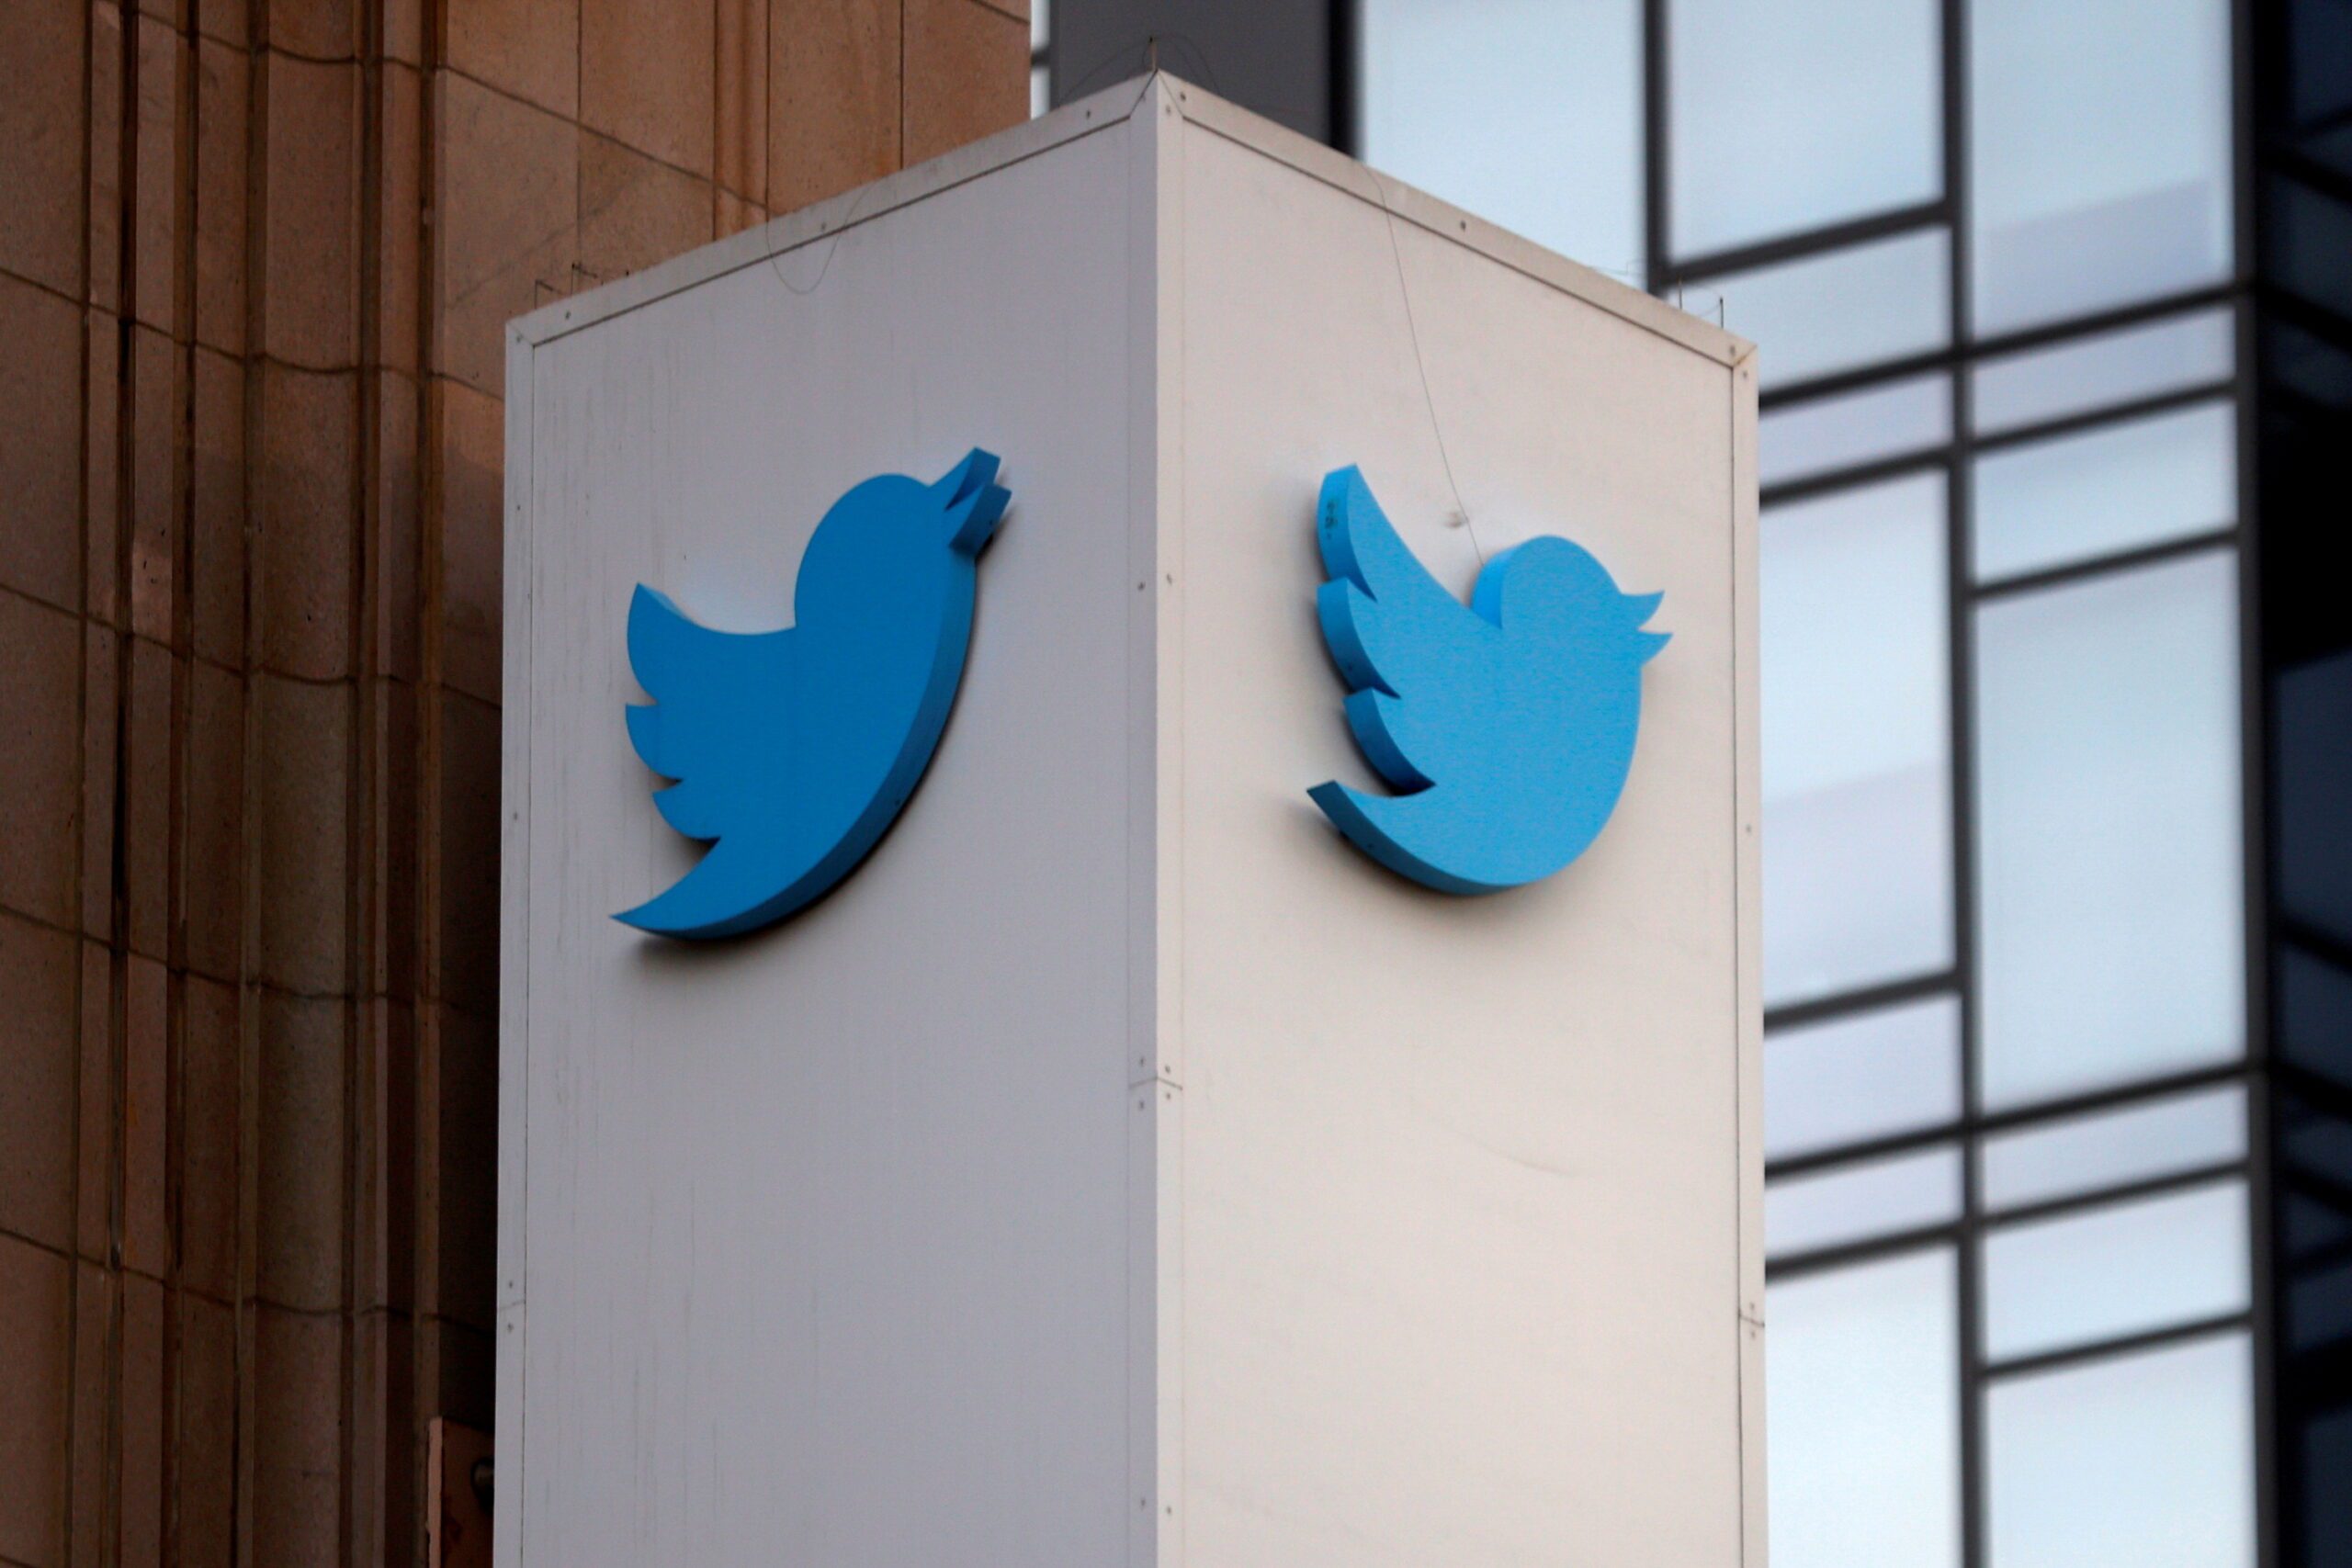 FILE PHOTO: A Twitter logo is seen outside the company headquarters in San Francisco, California, U.S., January 11, 2021. REUTERS/Stephen Lam